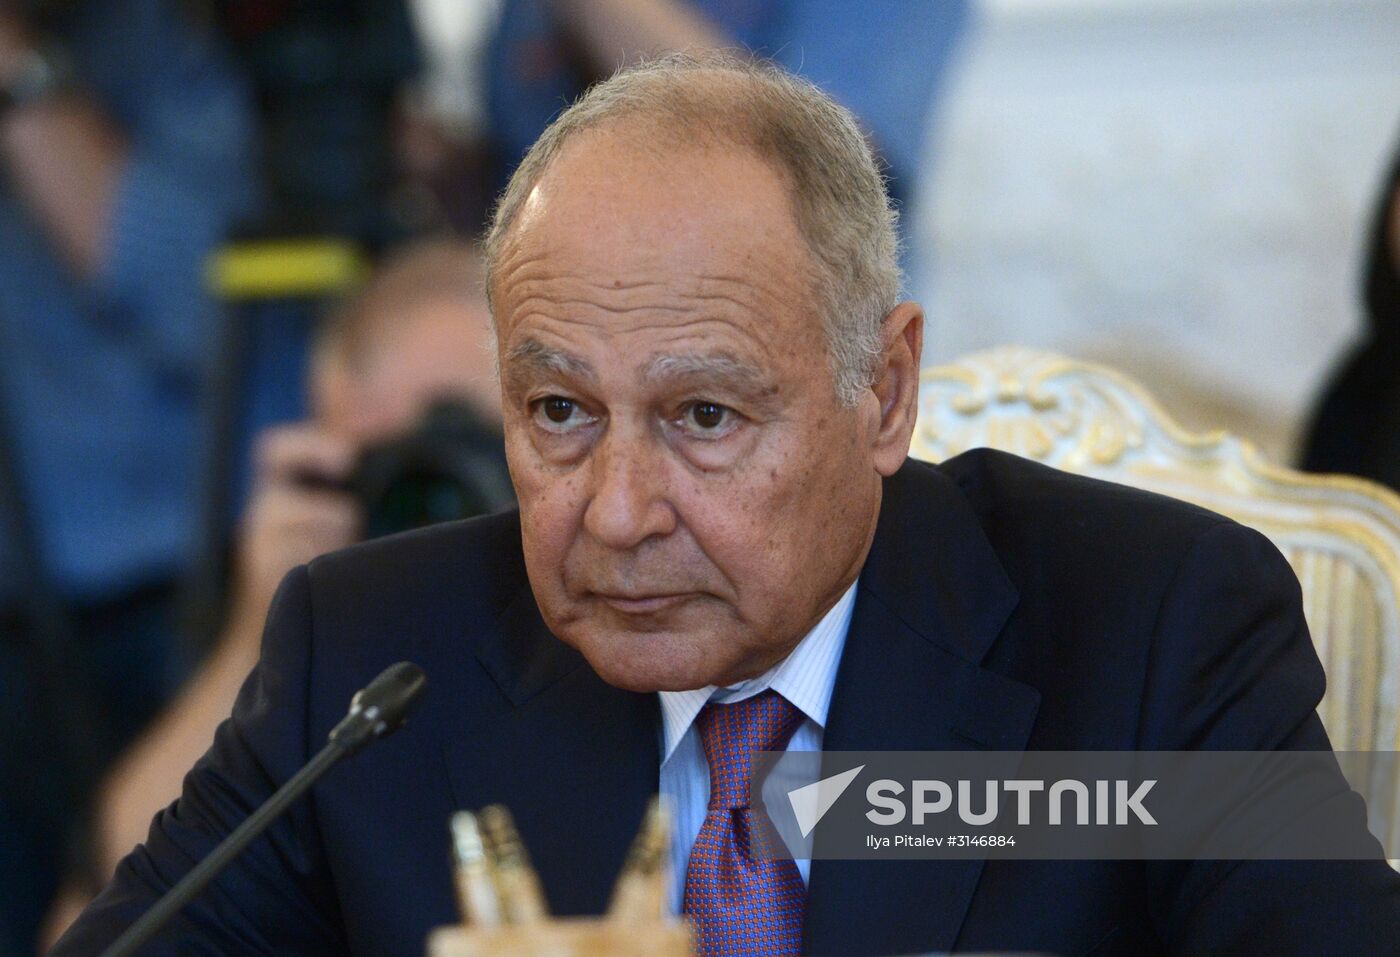 Foreign Minister Sergei Lavrov meets with Arab League Secretary-General Ahmed Aboul-Gheit